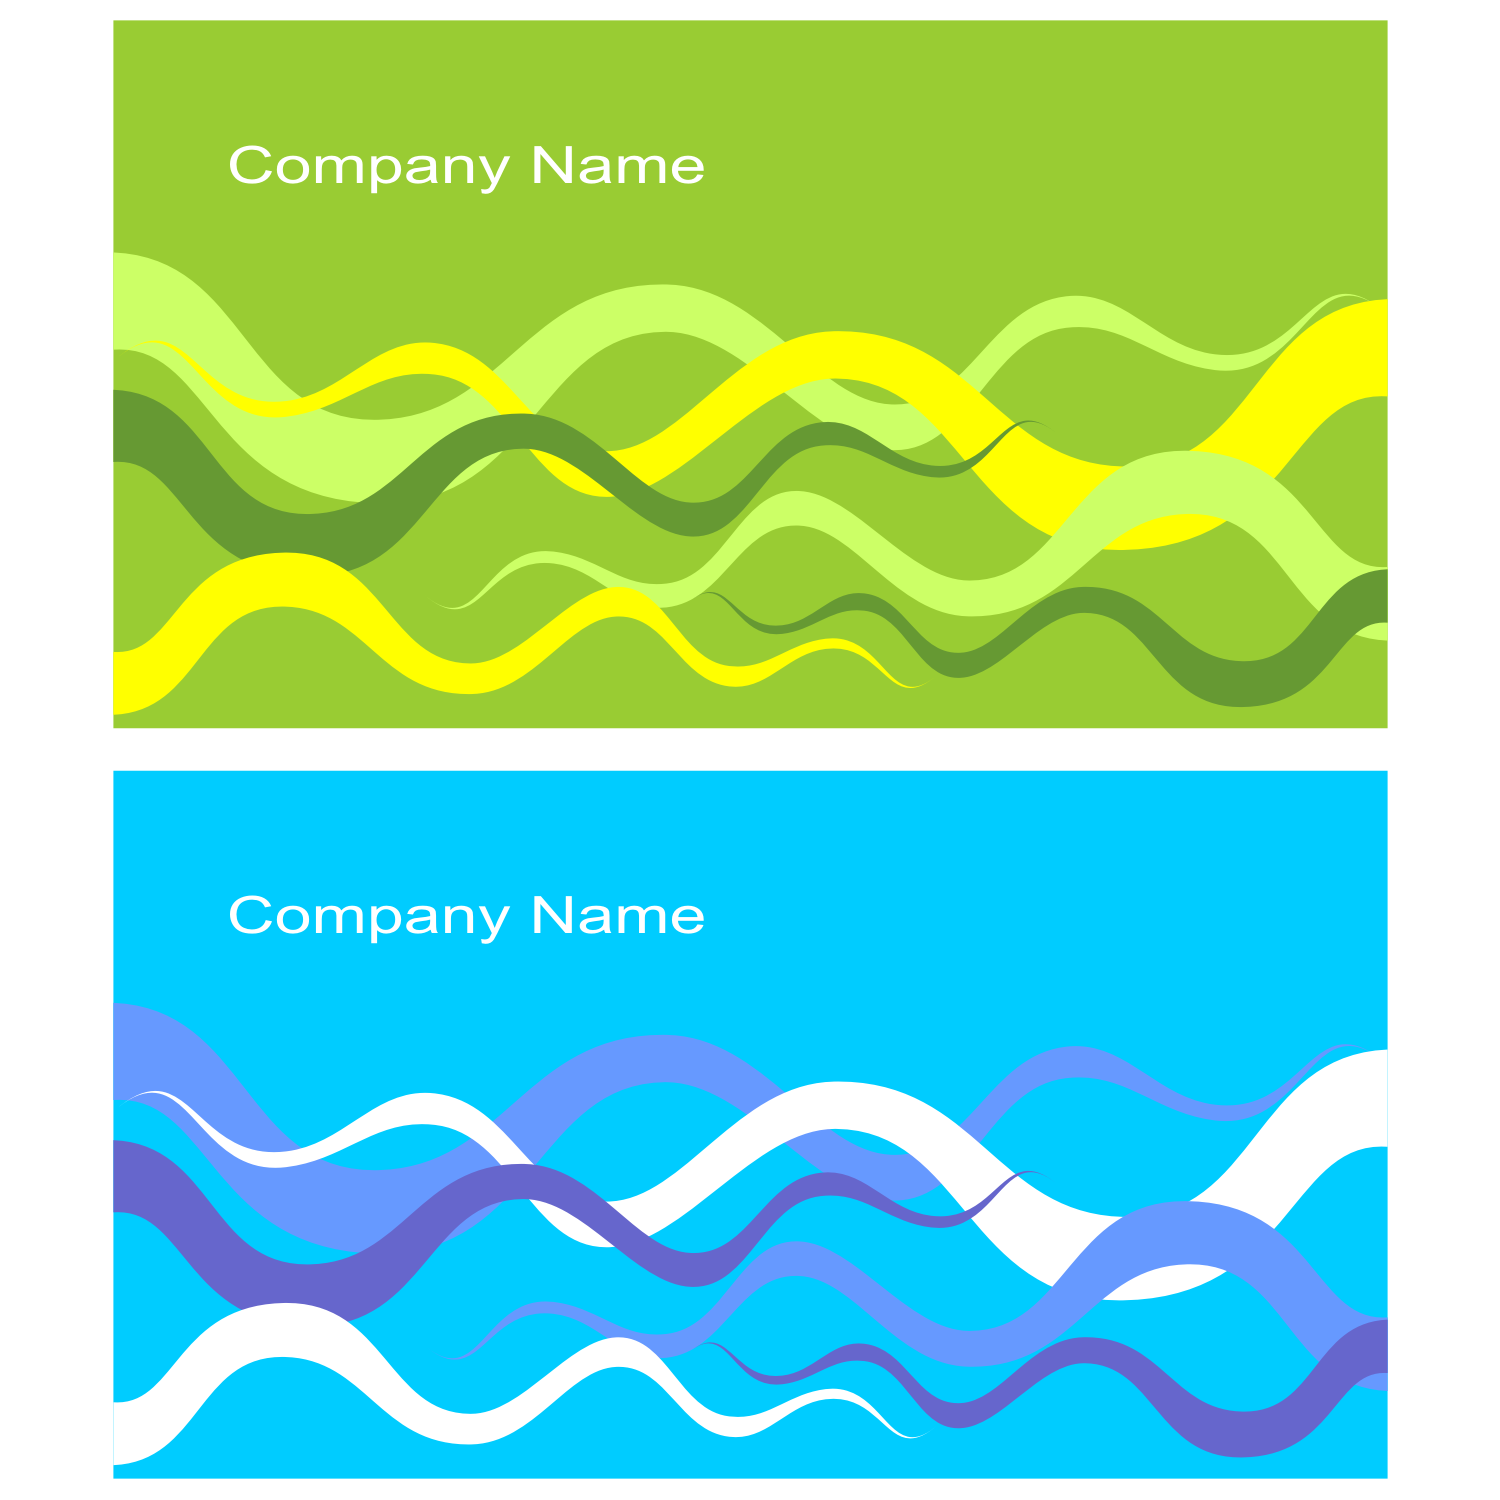 Set of business cards with waves